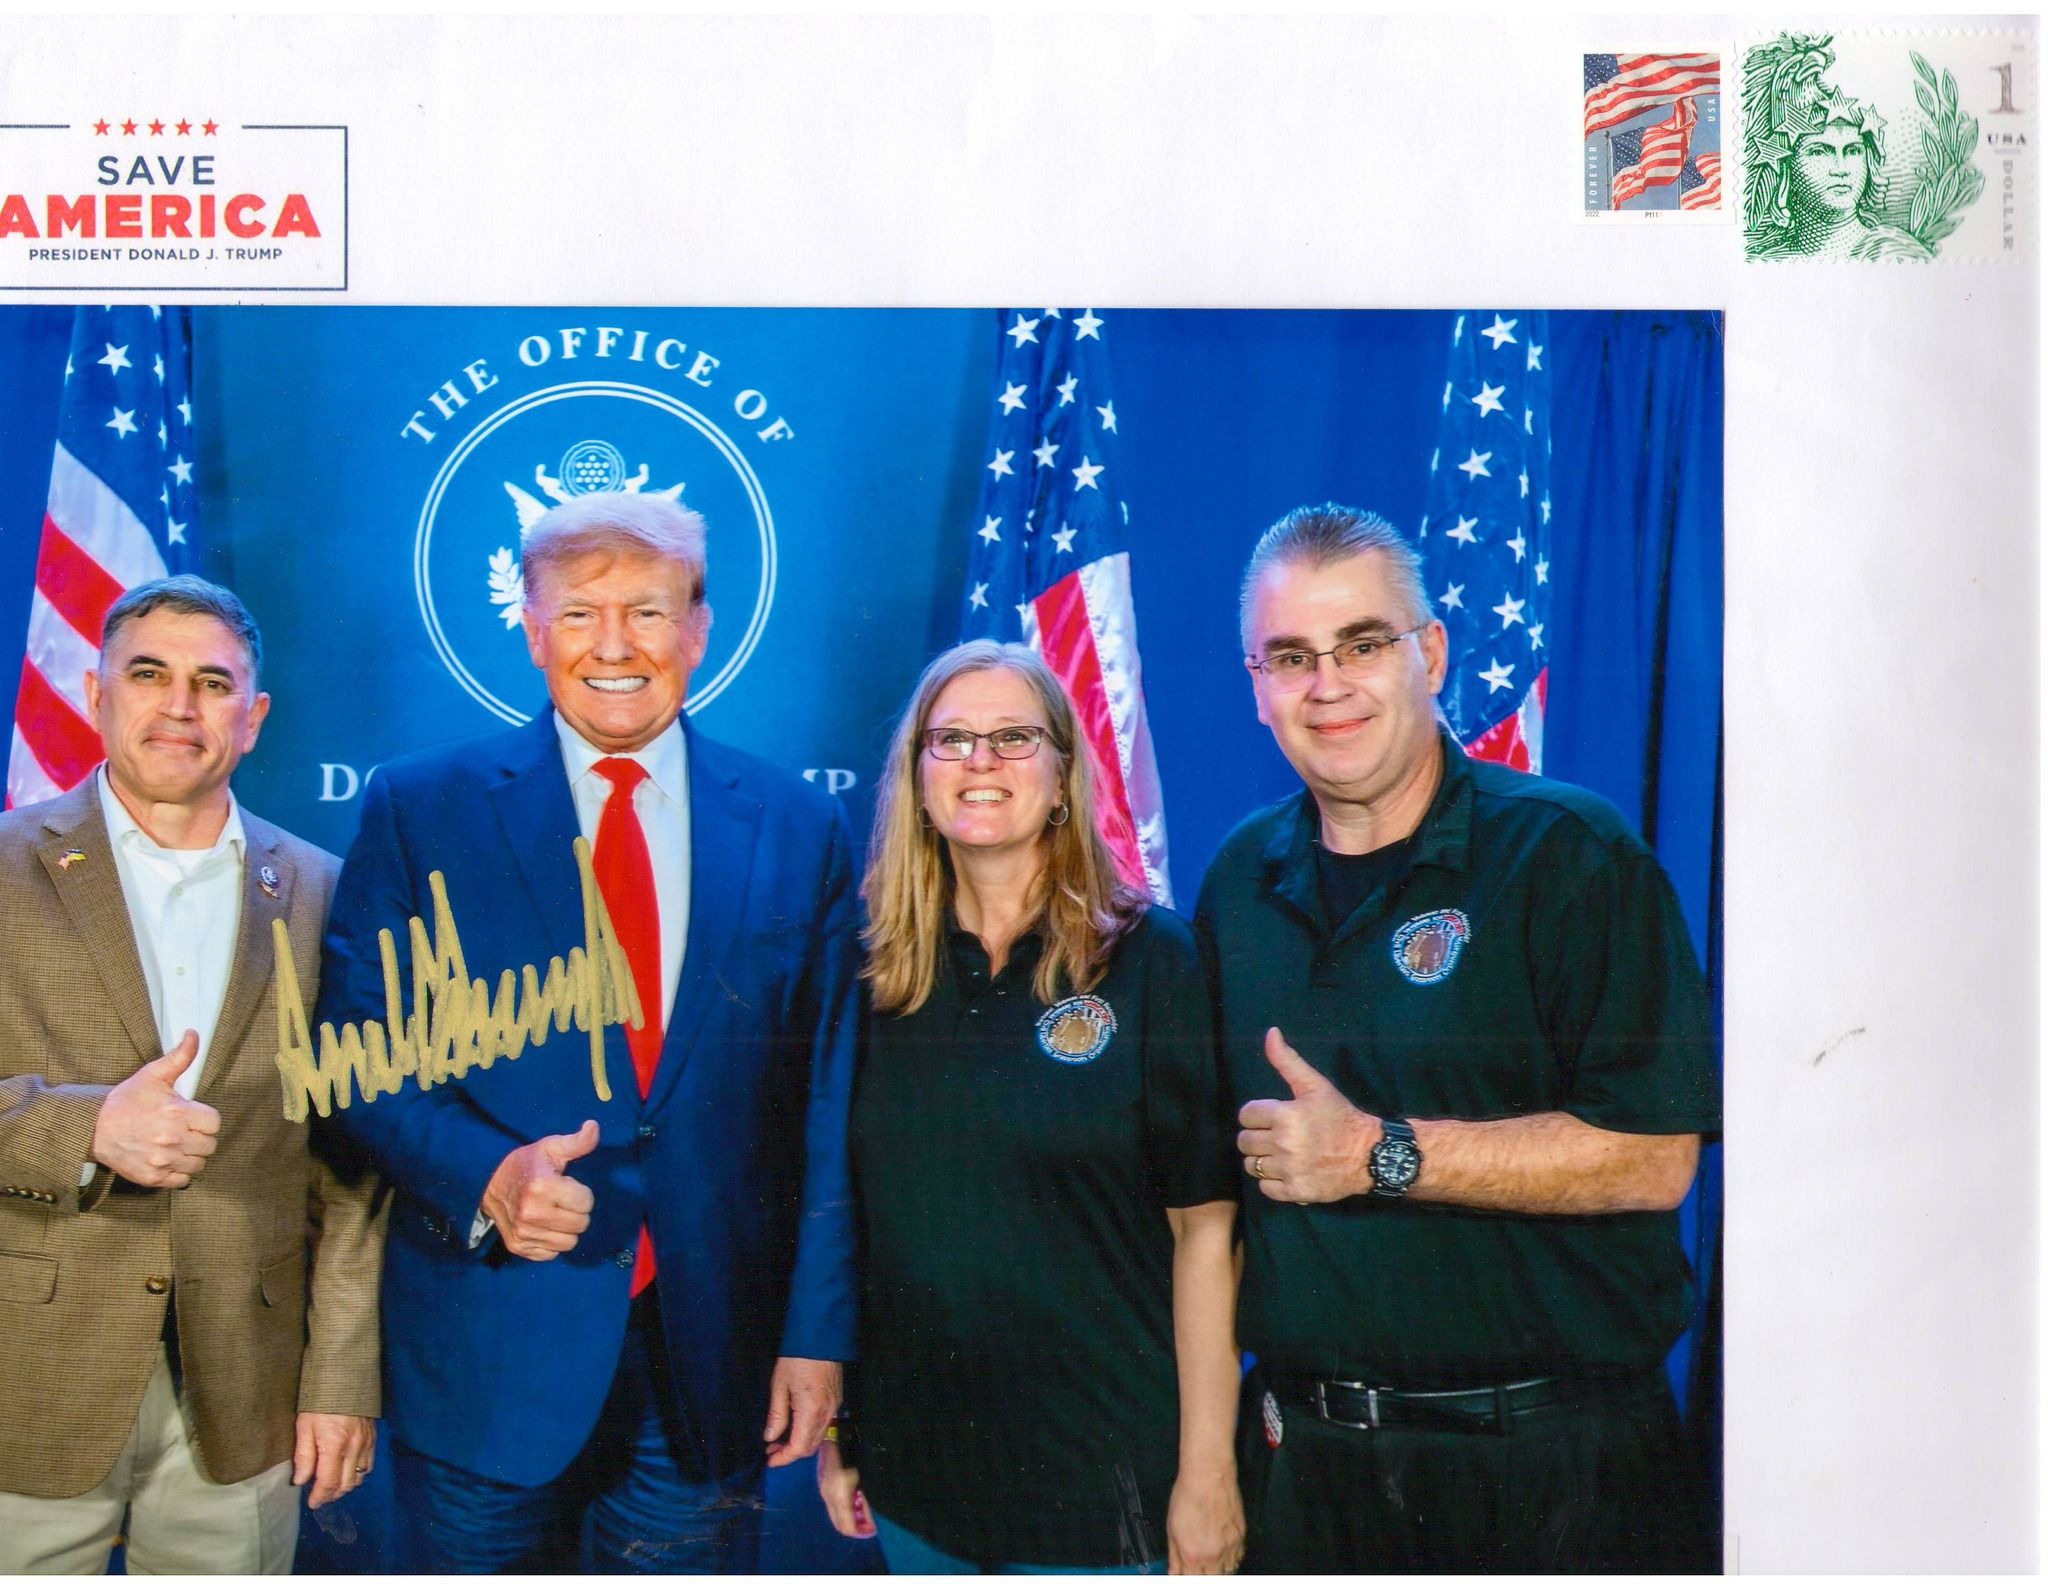 Trump signed photo for Stan Fitzgerald